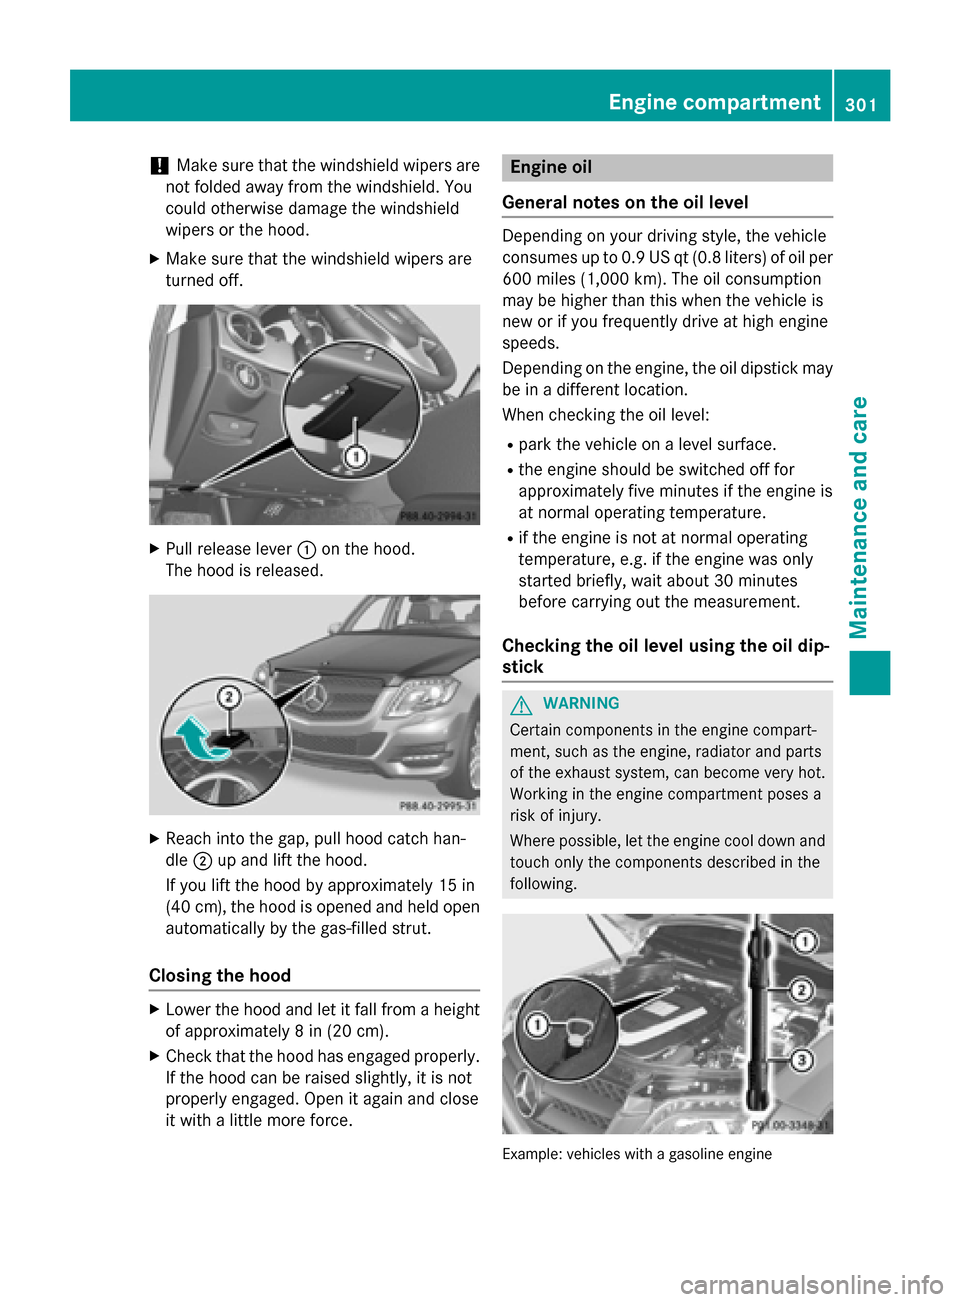 MERCEDES-BENZ GLK-Class 2015 X204 Service Manual !
Make sure that the windshield wipers are
not folded away from the windshield. You
could otherwise damage the windshield
wipers or the hood.
X Make sure that the windshield wipers are
turned off. X
P